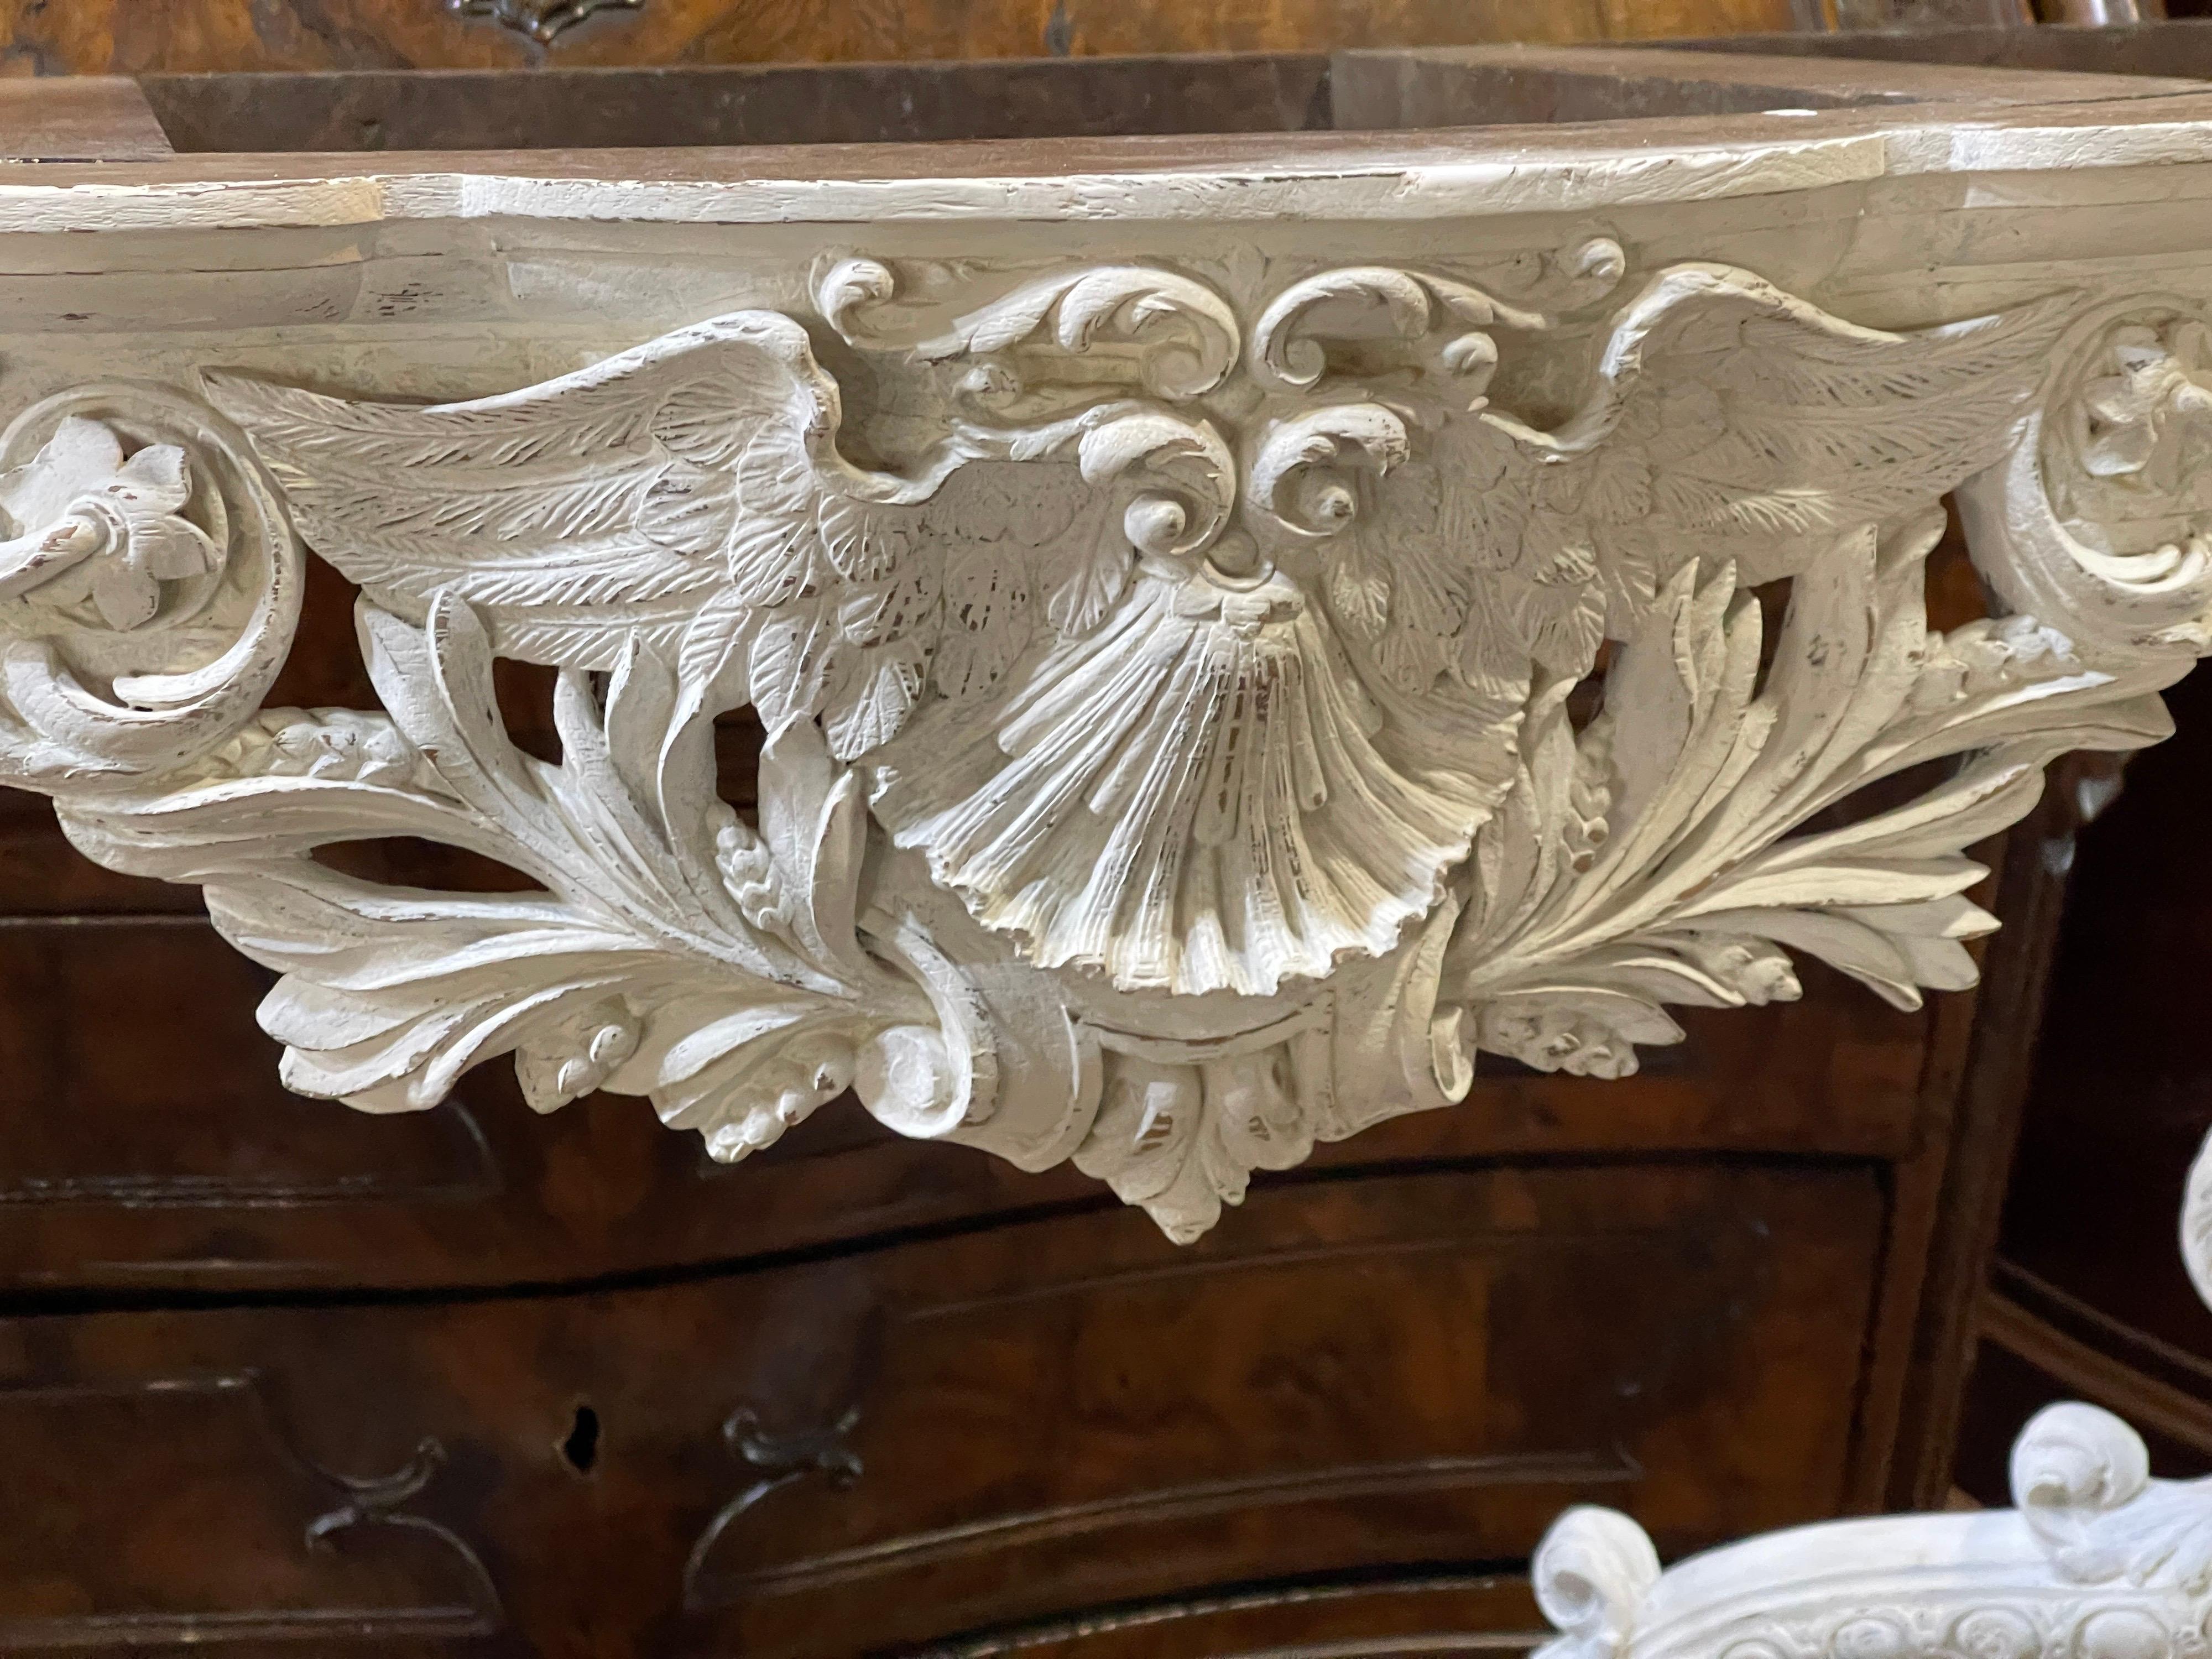 Elegant Italian Console in Louis XV style, white lacquered, early nineteenth century, of great workmanship 's carving, oak wood. Crossbow and legs moved with goat foot. Original marble. The console in order to be put on the marble must be fixed to